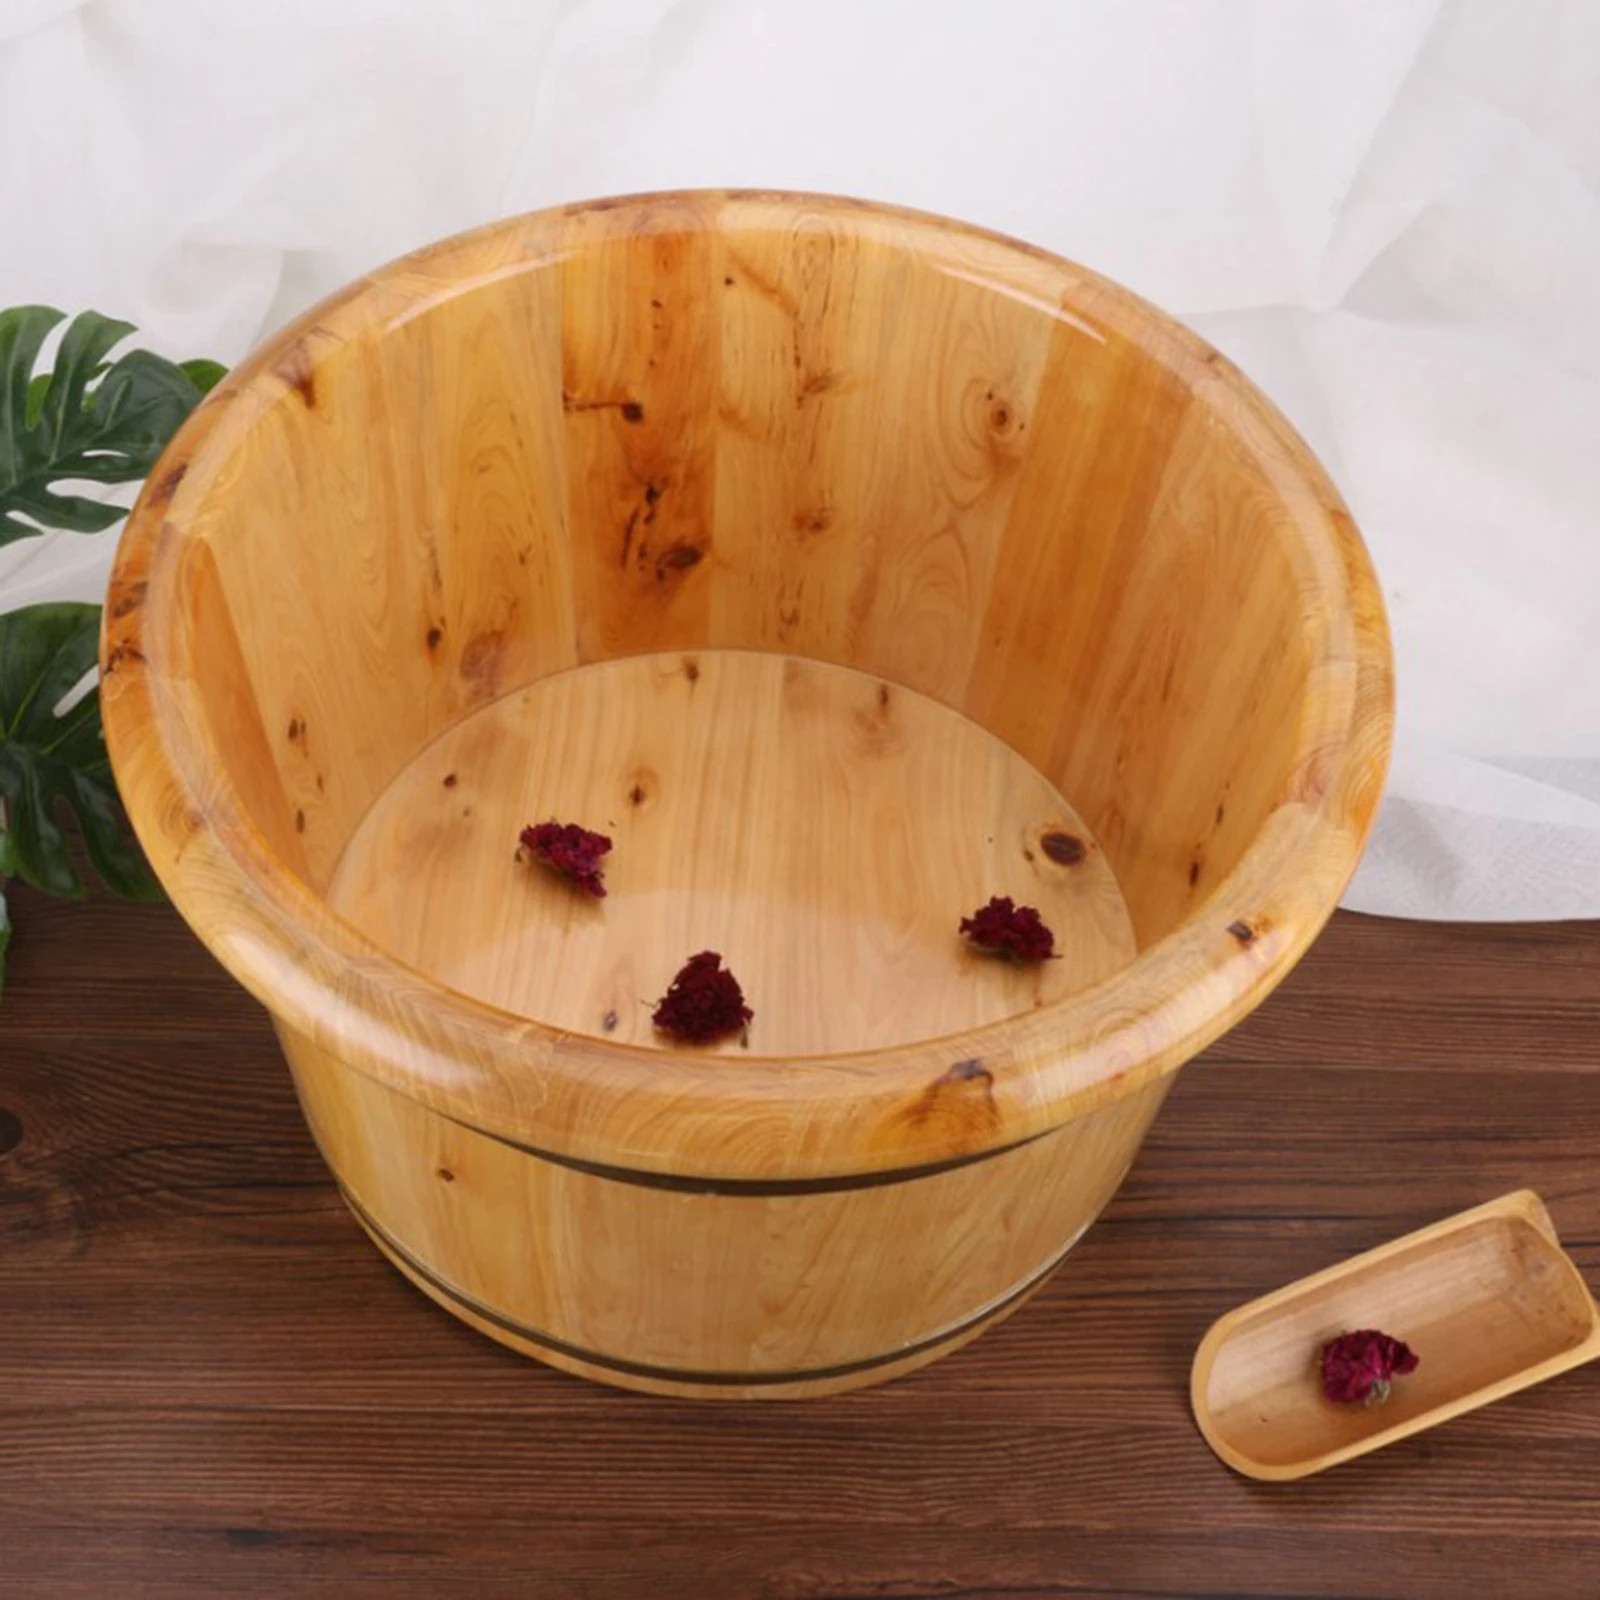 Practical Cedar Wooden Foot Basin for Foot Washing Removal Fatigue Relieving